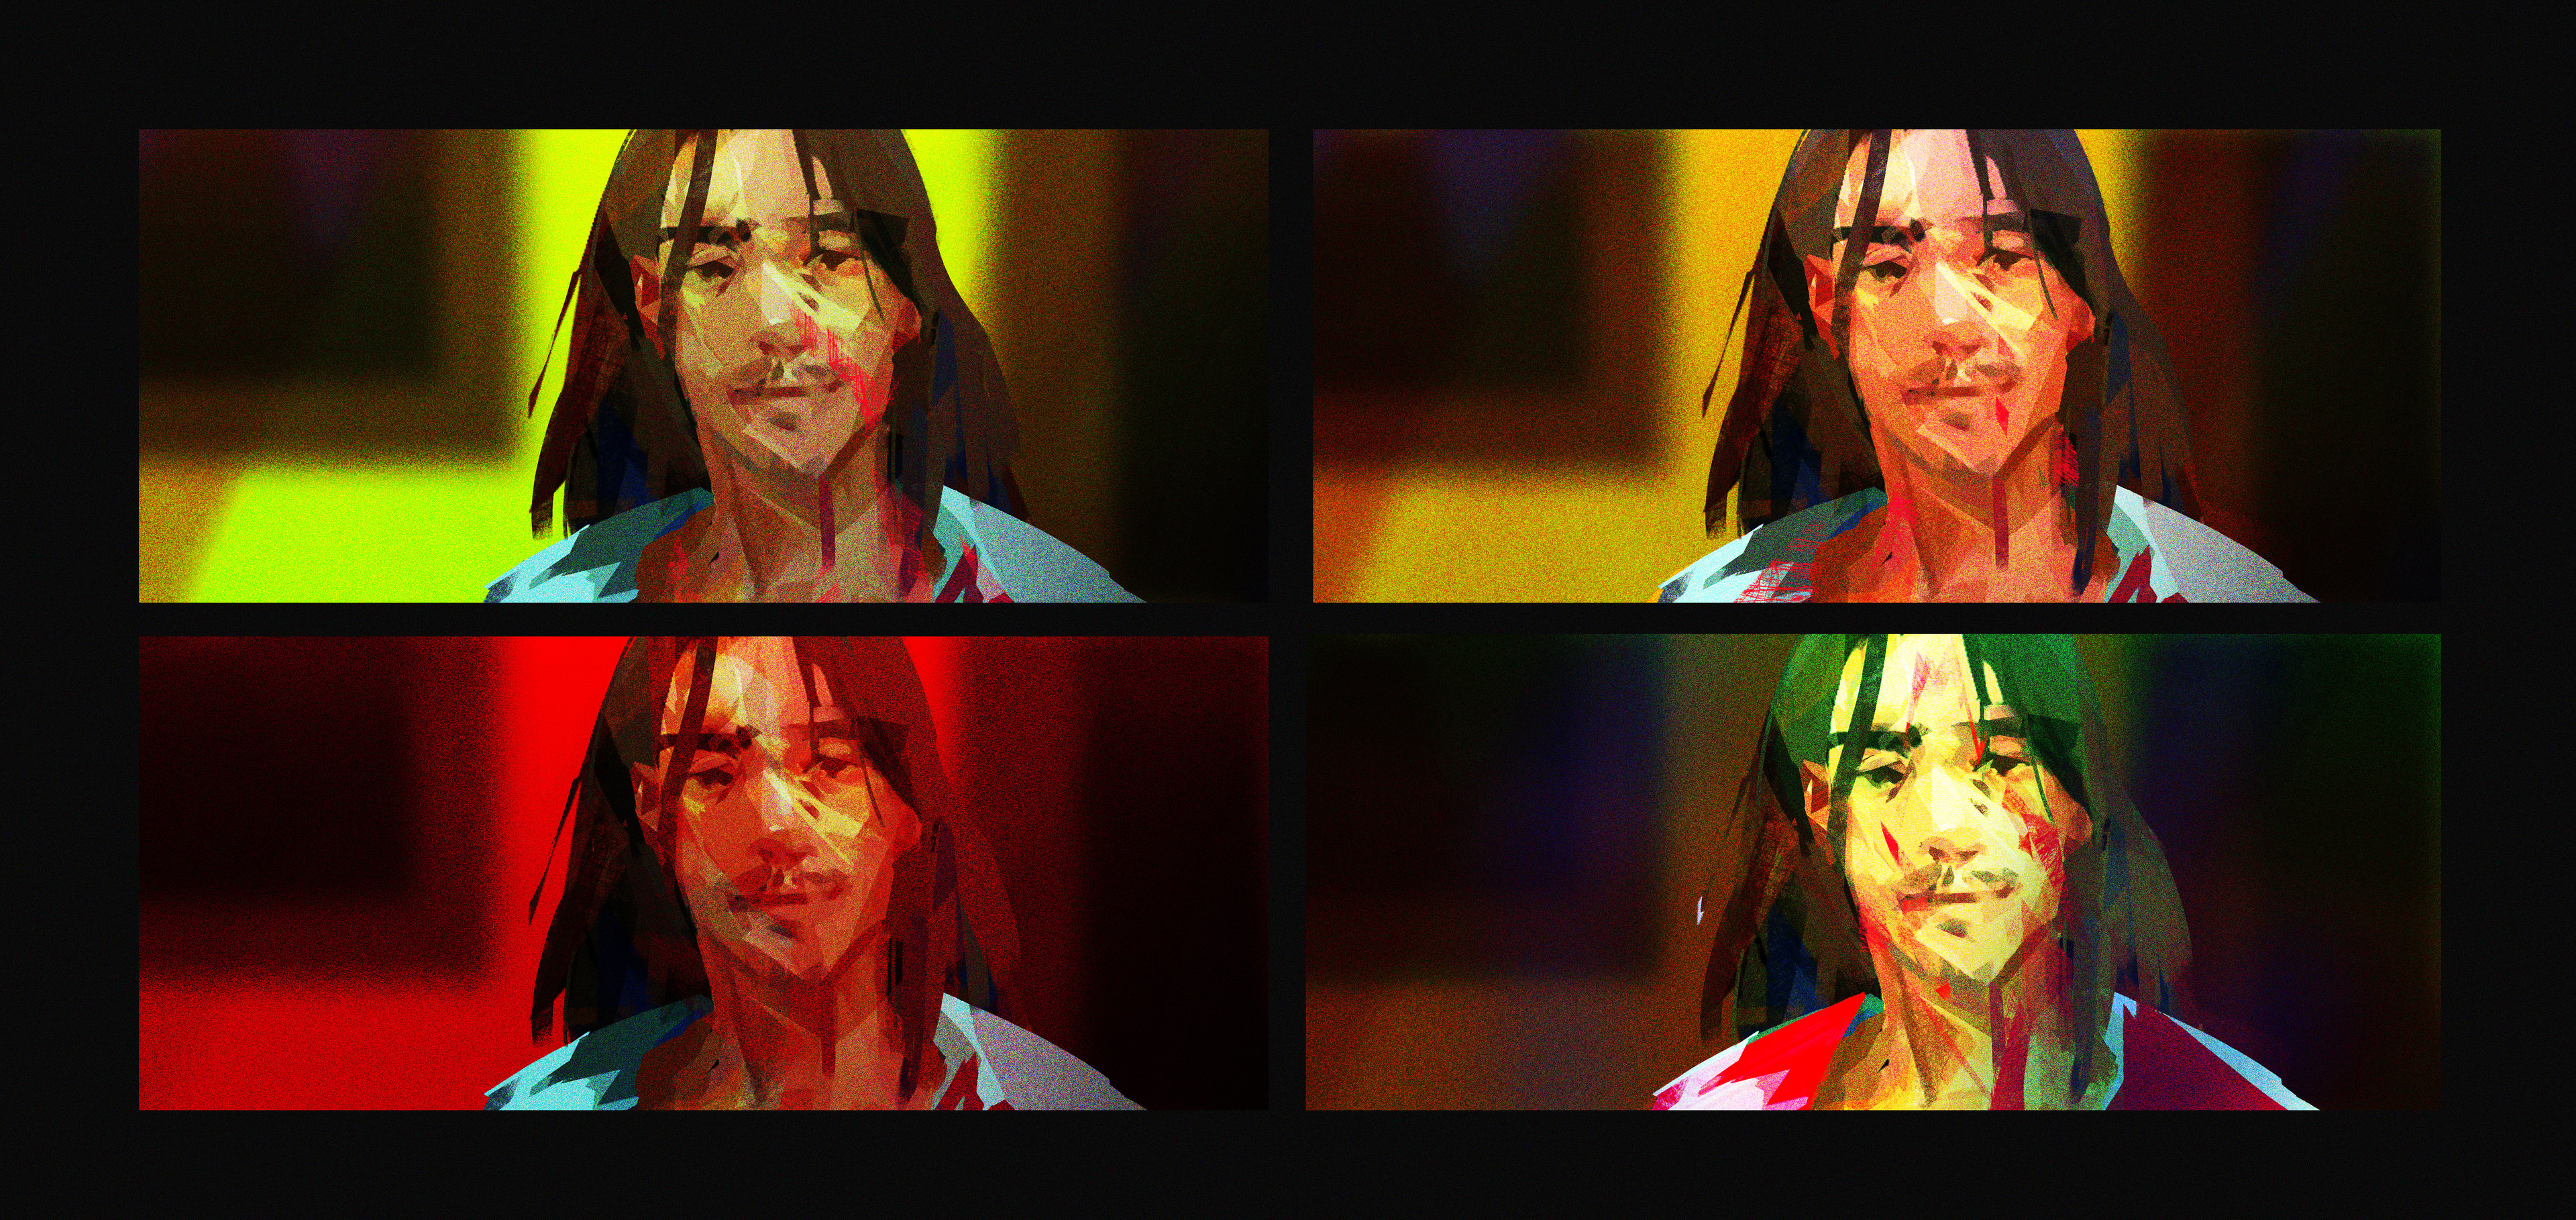 Early color experiments for the look and feel of the short film